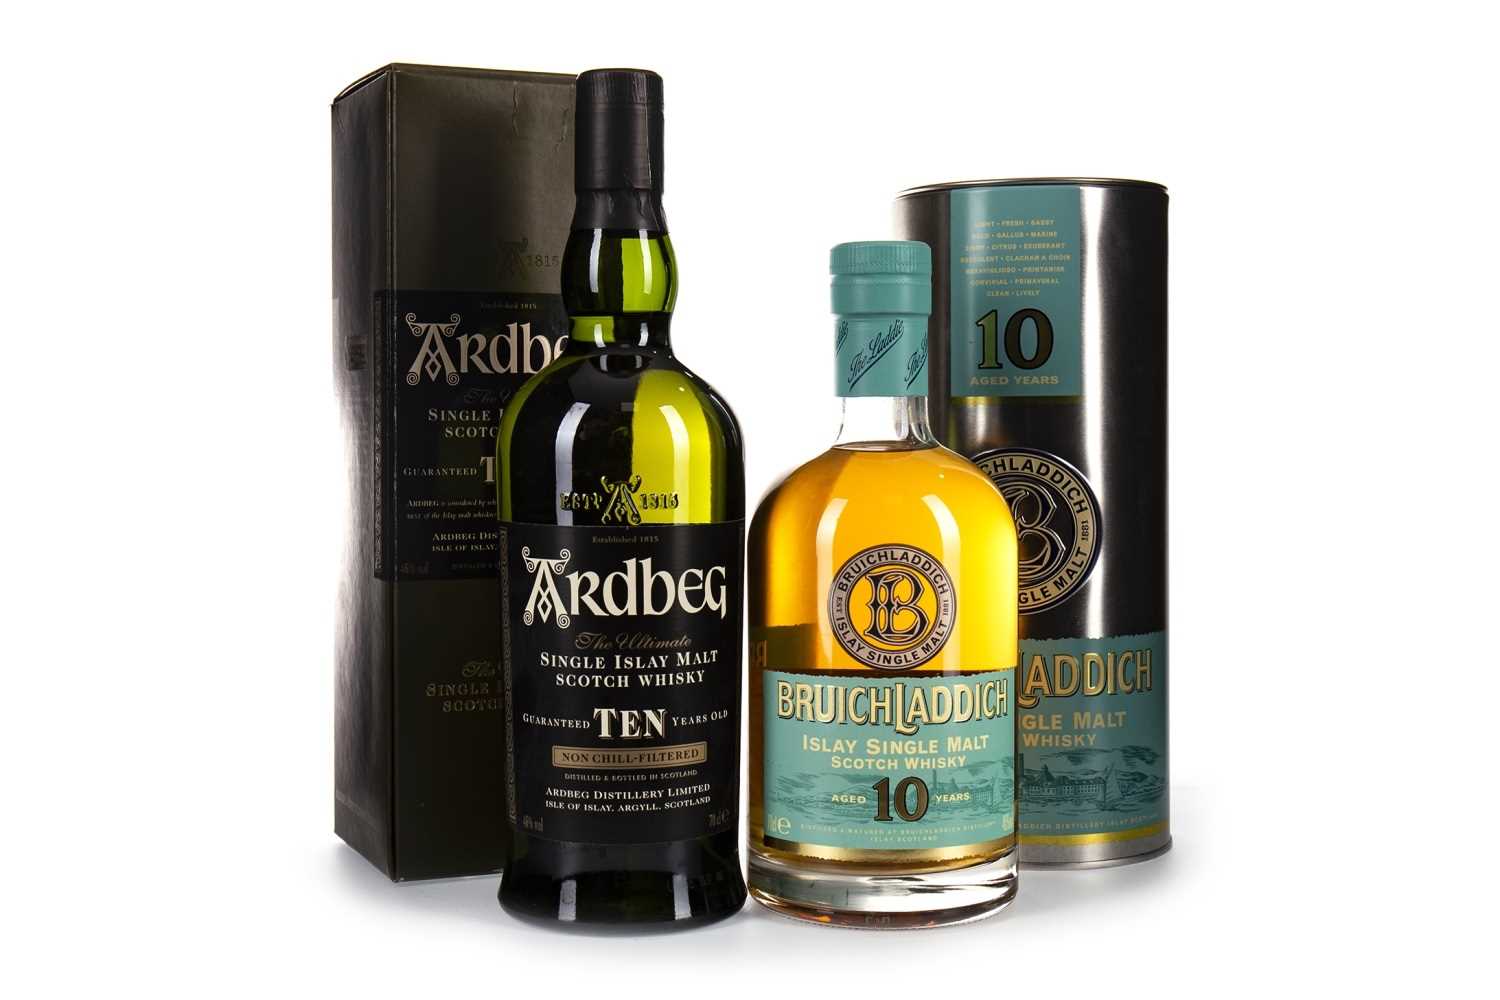 Lot 310 - ARDBEG 10 YEARS OLD AND BRUICHLADDICH 10 YEARS OLD